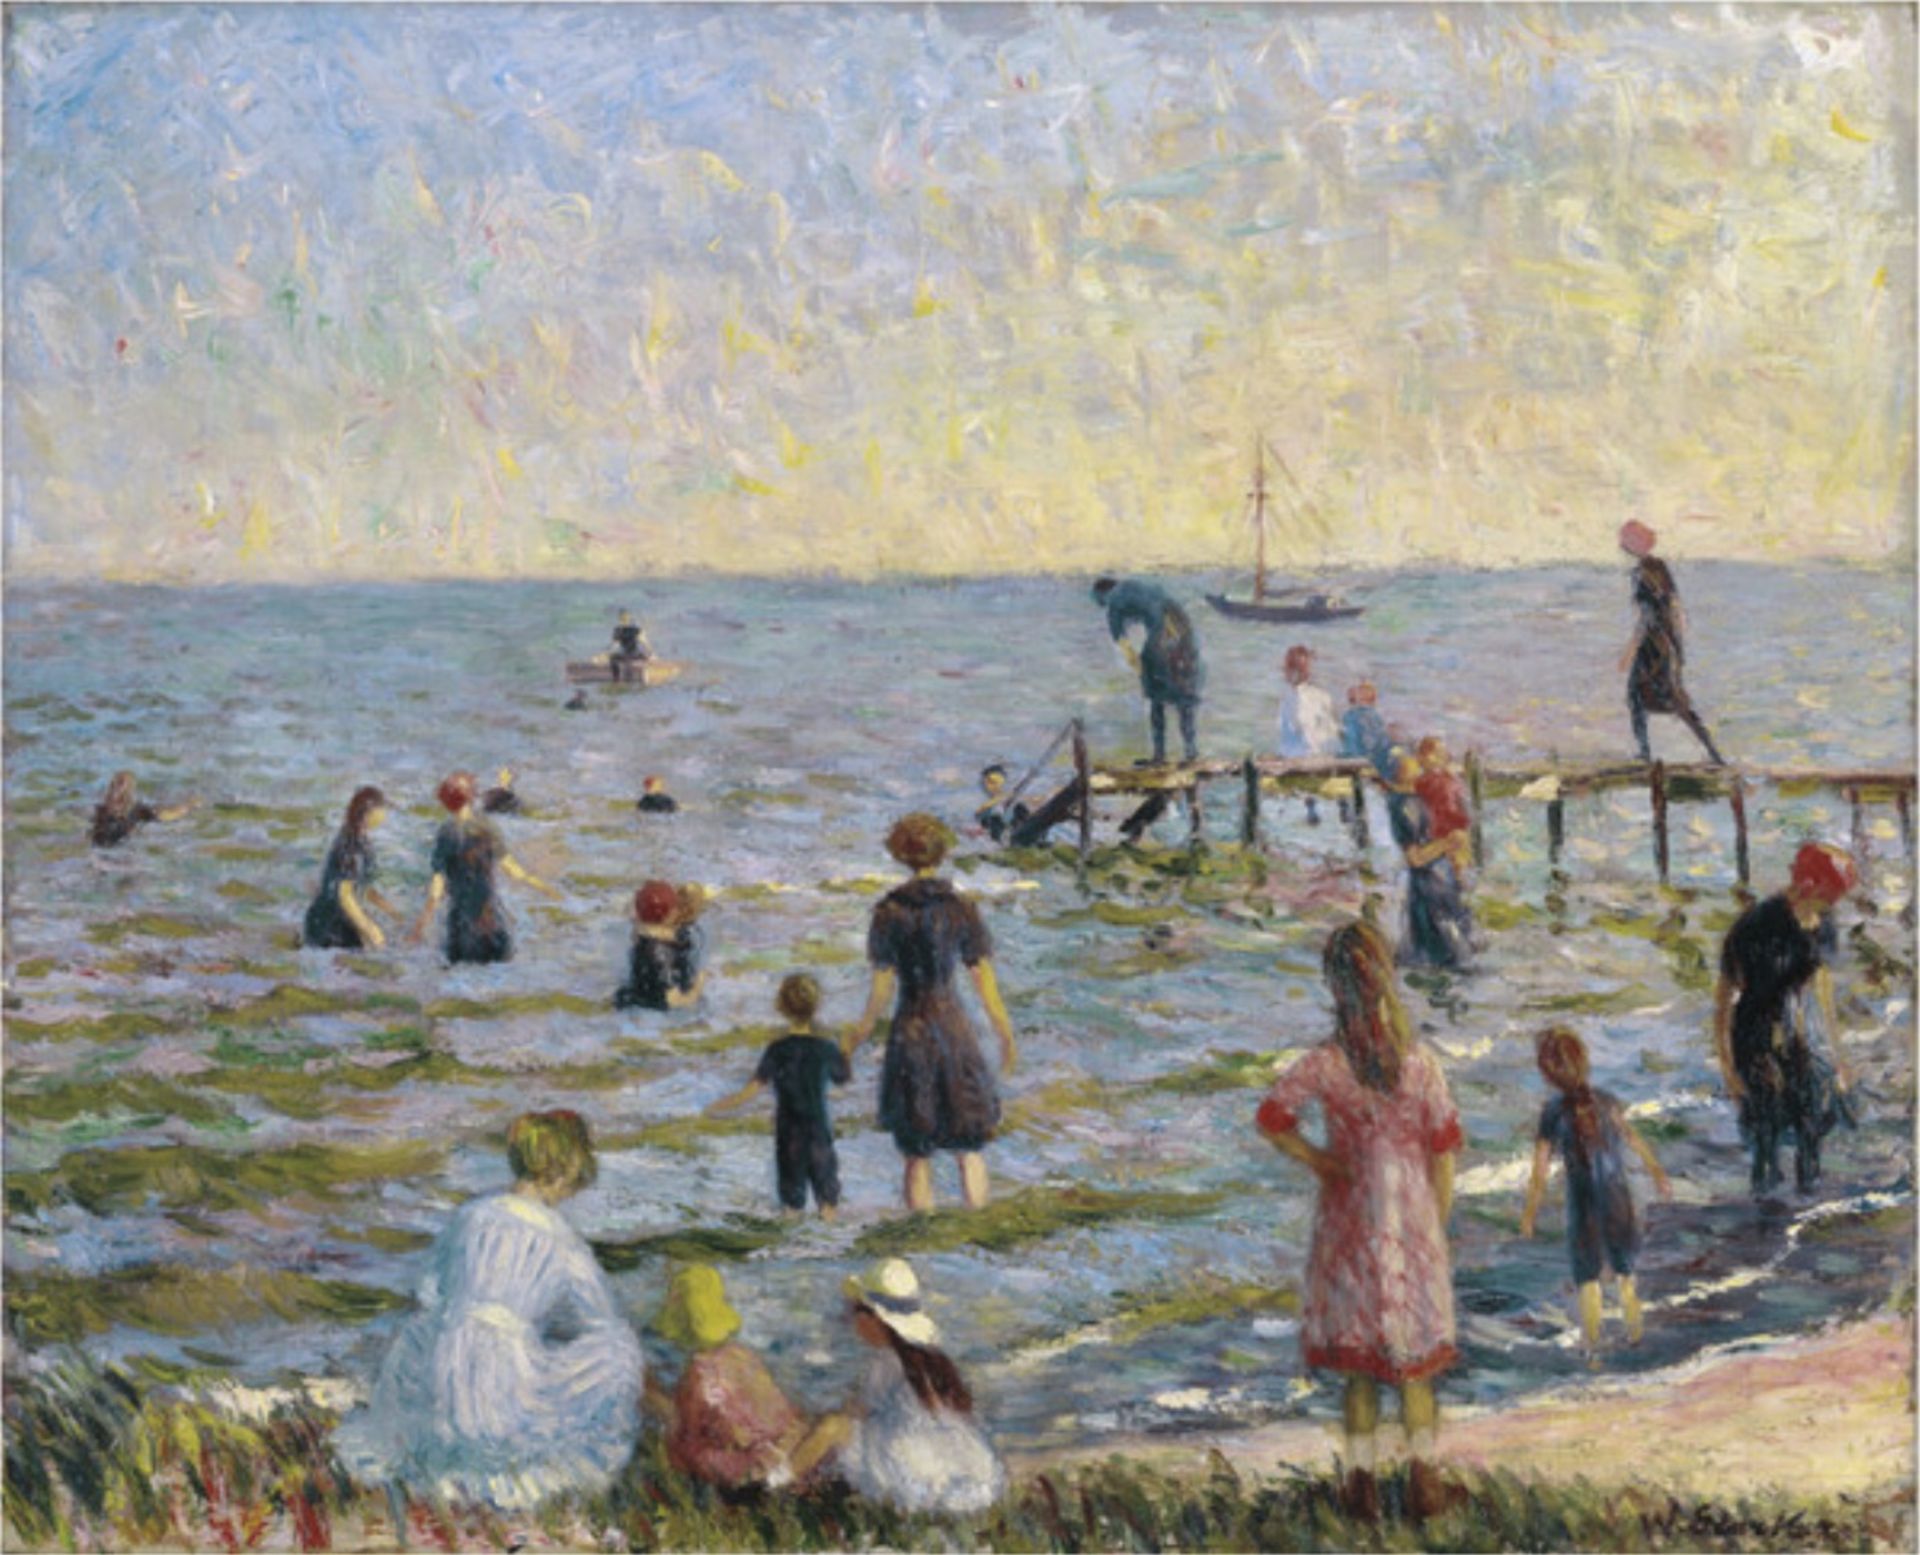 William Glackens "Bathing at Bellport, Long Island, 1912" Offset Lithograph